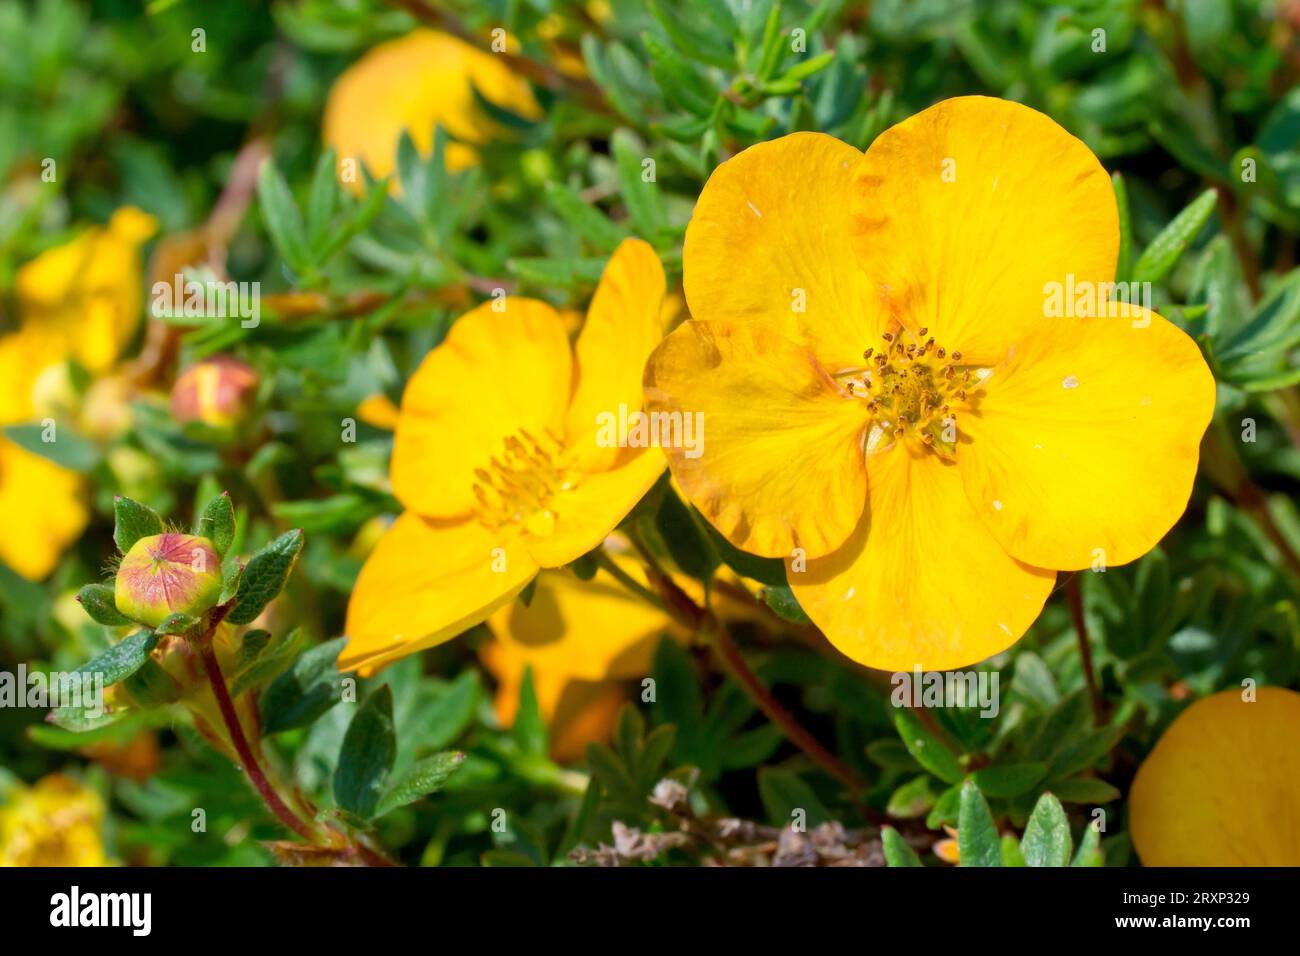 Shrubby Cinquefoil (potentilla fruticosa), possibly cultivar Bella Sol, close up showing the yellow-orange flowers of the commonly planted shrub. Stock Photo